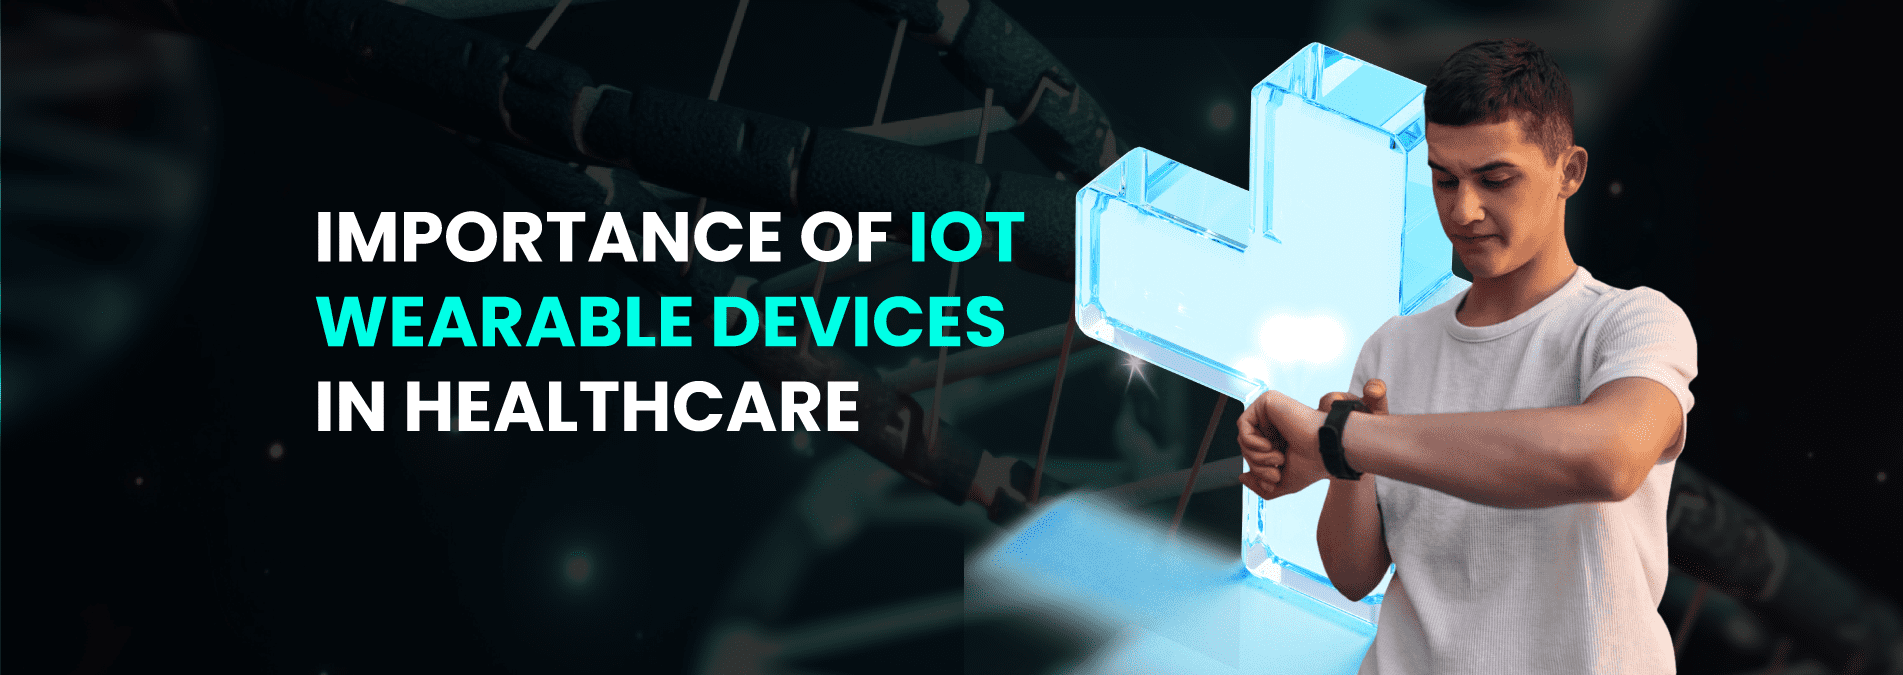 Importance of IoT Wearable Devices in Health Care